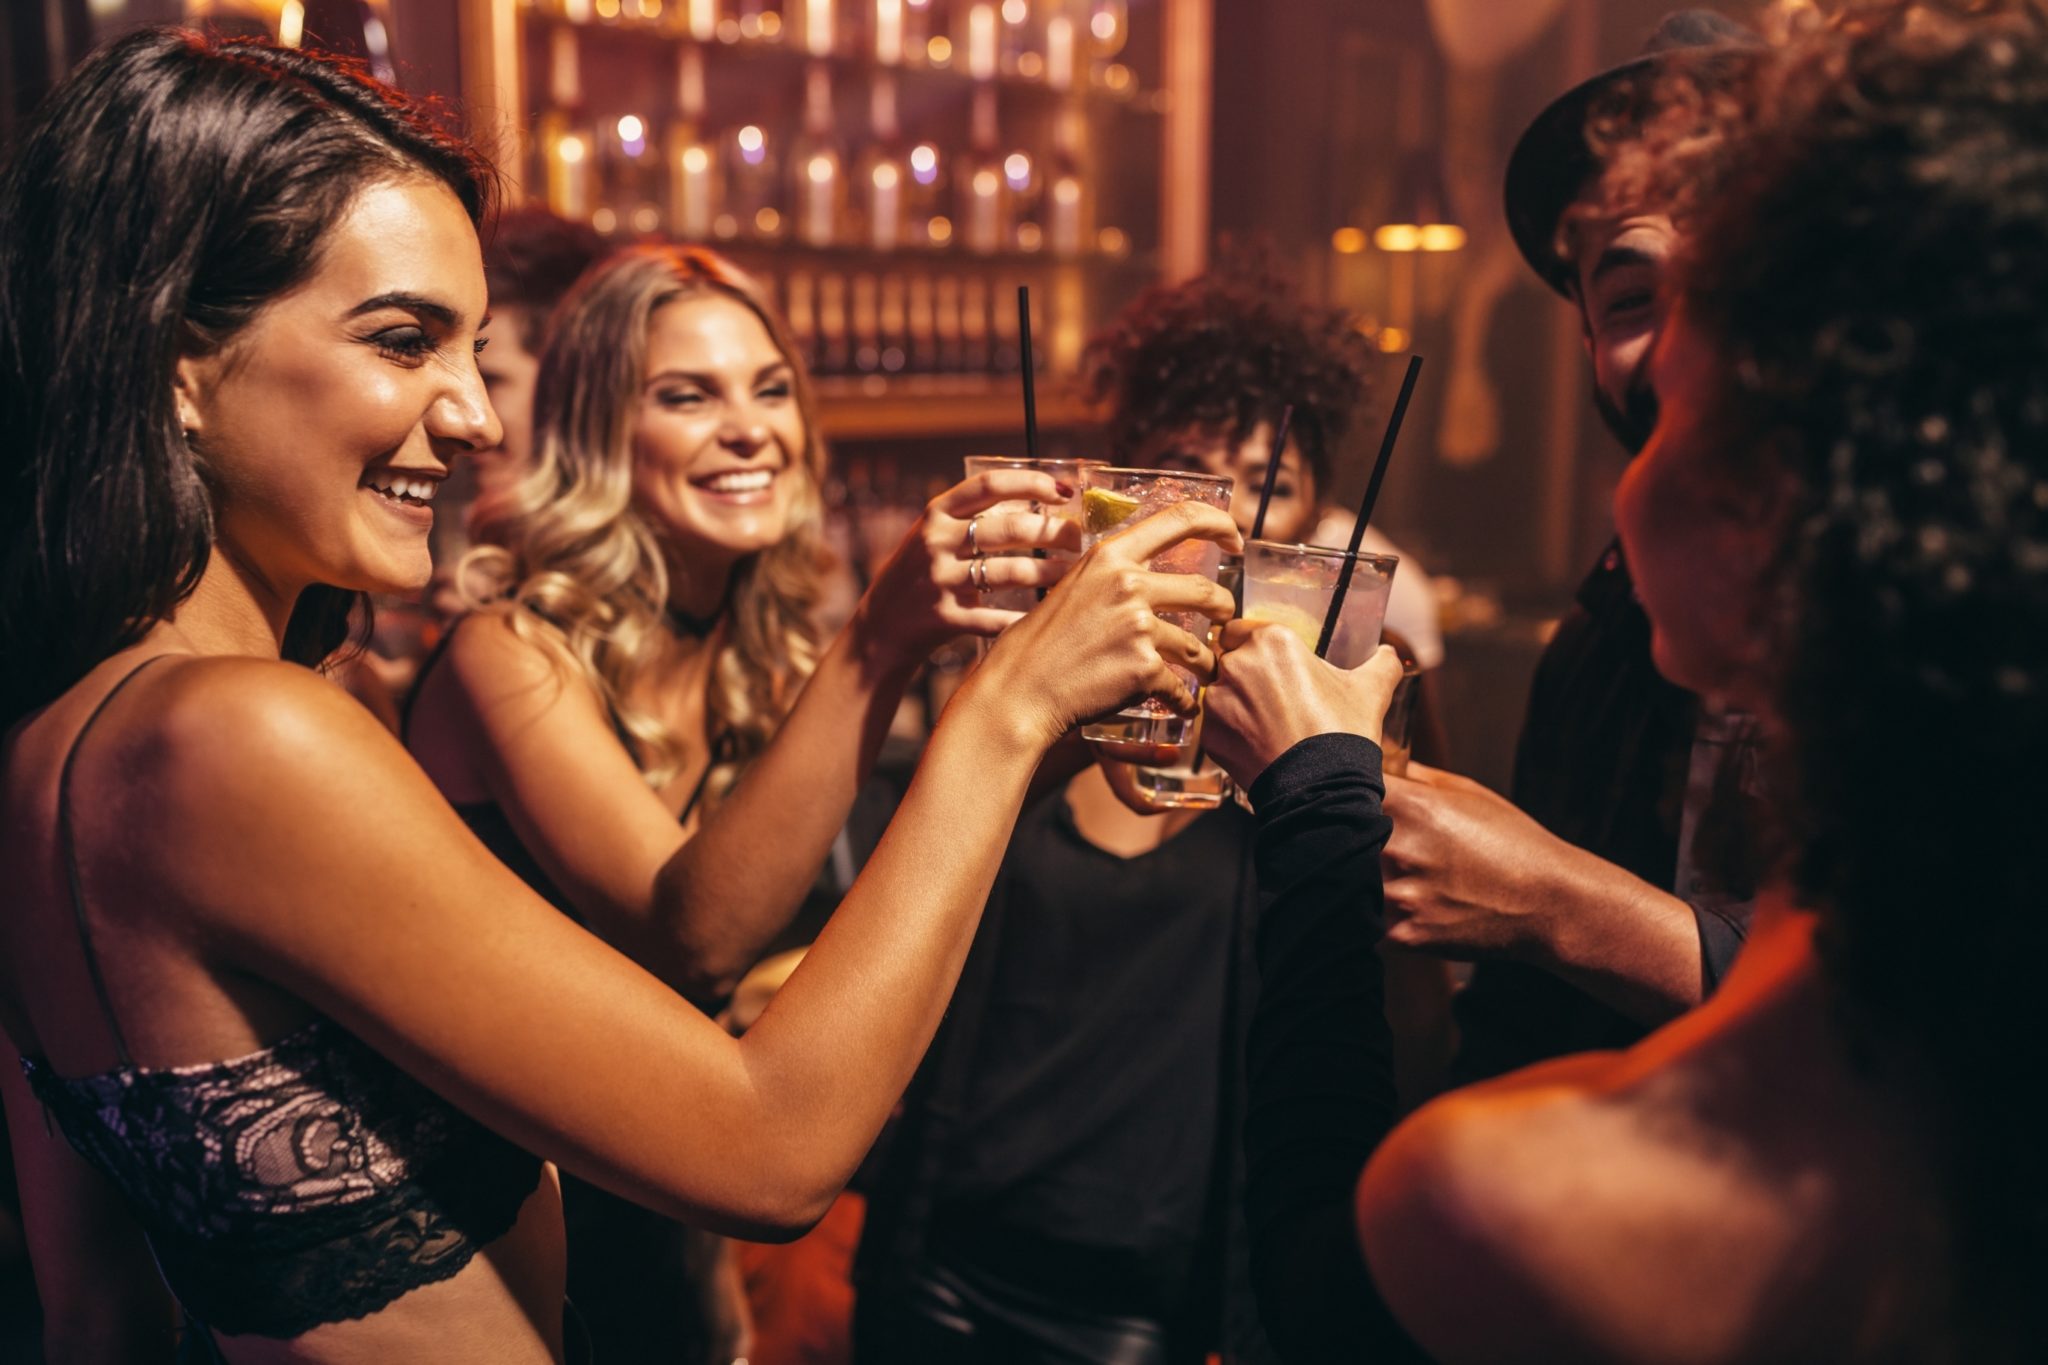 Experience Las Vegas Like a VIP With Bottle Service